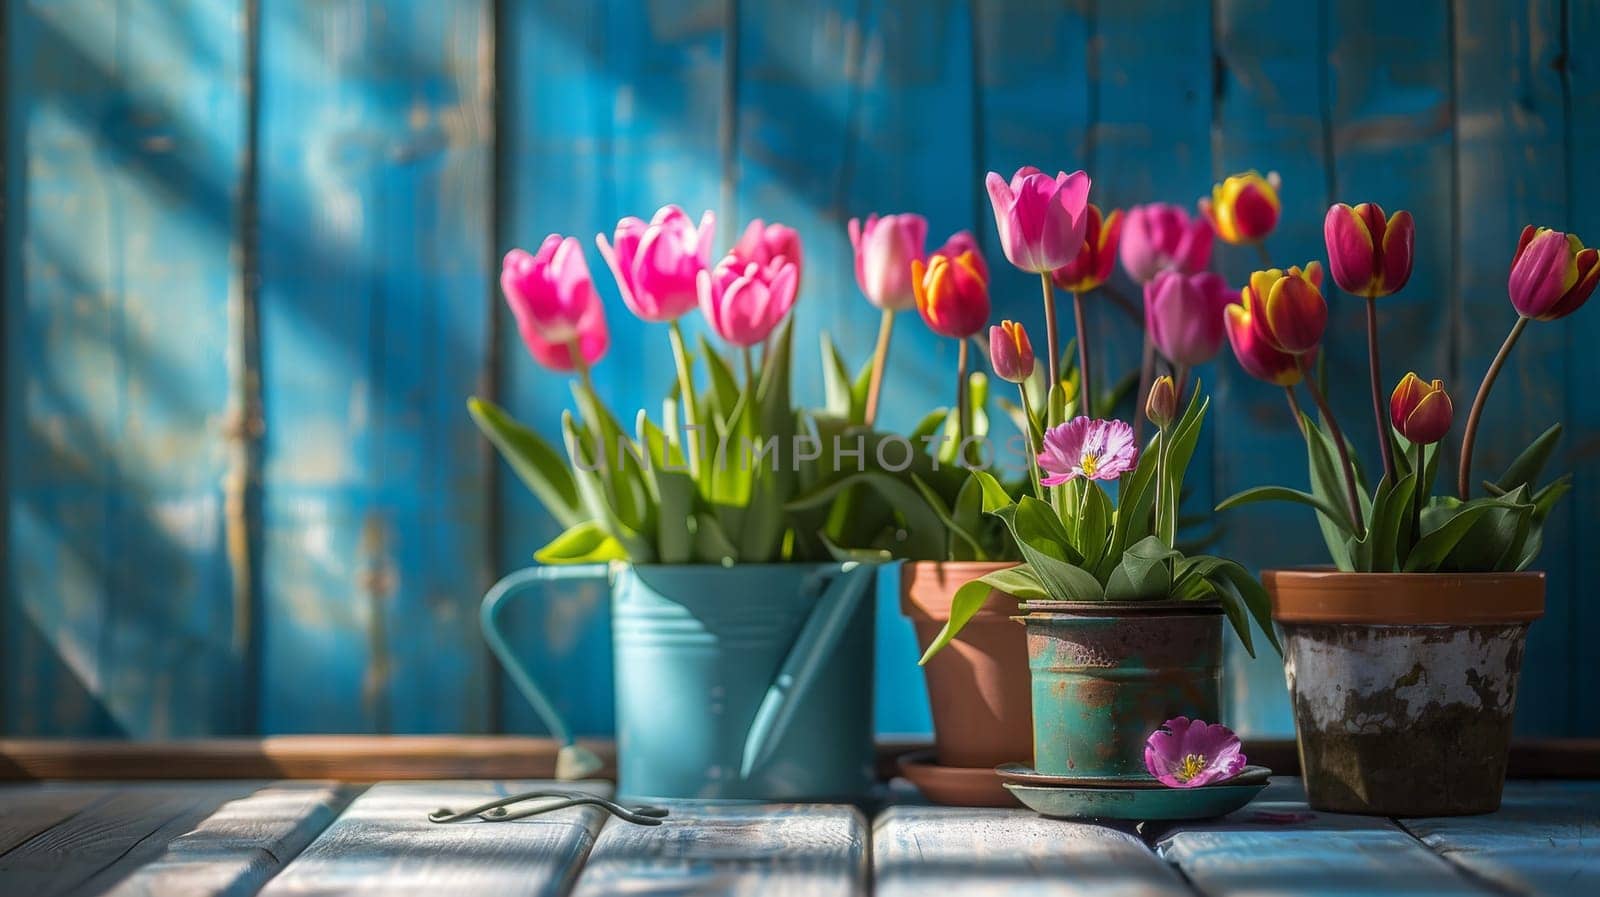 flowerpots of tulips, spring flower season by itchaznong